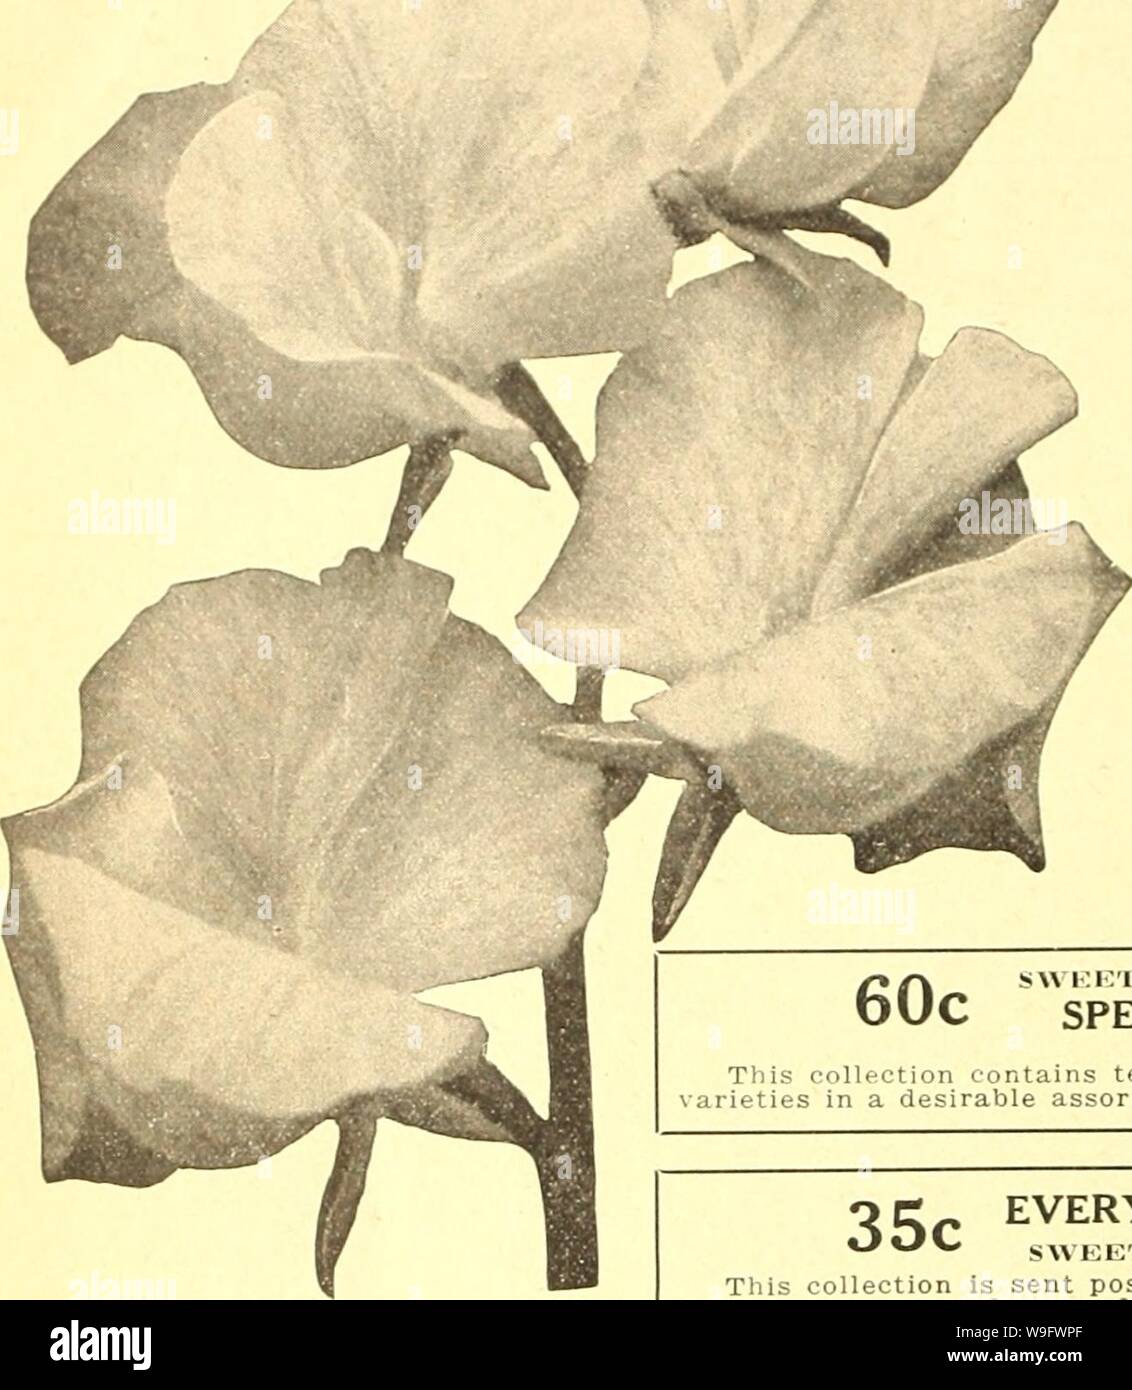 Archive image from page 75 of Currie's farm and garden annual. Currie's farm and garden annual : spring 1927 52nd year  curriesfarmgarde19curr 10 Year: 1927 ( 70 CURRIE BROTHERS COMPANY, MILWAUKEE, WIS.    SWEET PEAS BEAUTIFUL, FRAGIl.XT. FASHIONABLE. The truly wonderful development of the Spencer plass of Sweet Peas since the creation or discoverv of 'Countess Spencer' a few years ago, is one of the marvels of the whole history of floriculture. There are now literally hundreds of distinct and partially distinct varieties, and these have displaced all but a dozen or so of the best of the old- Stock Photo